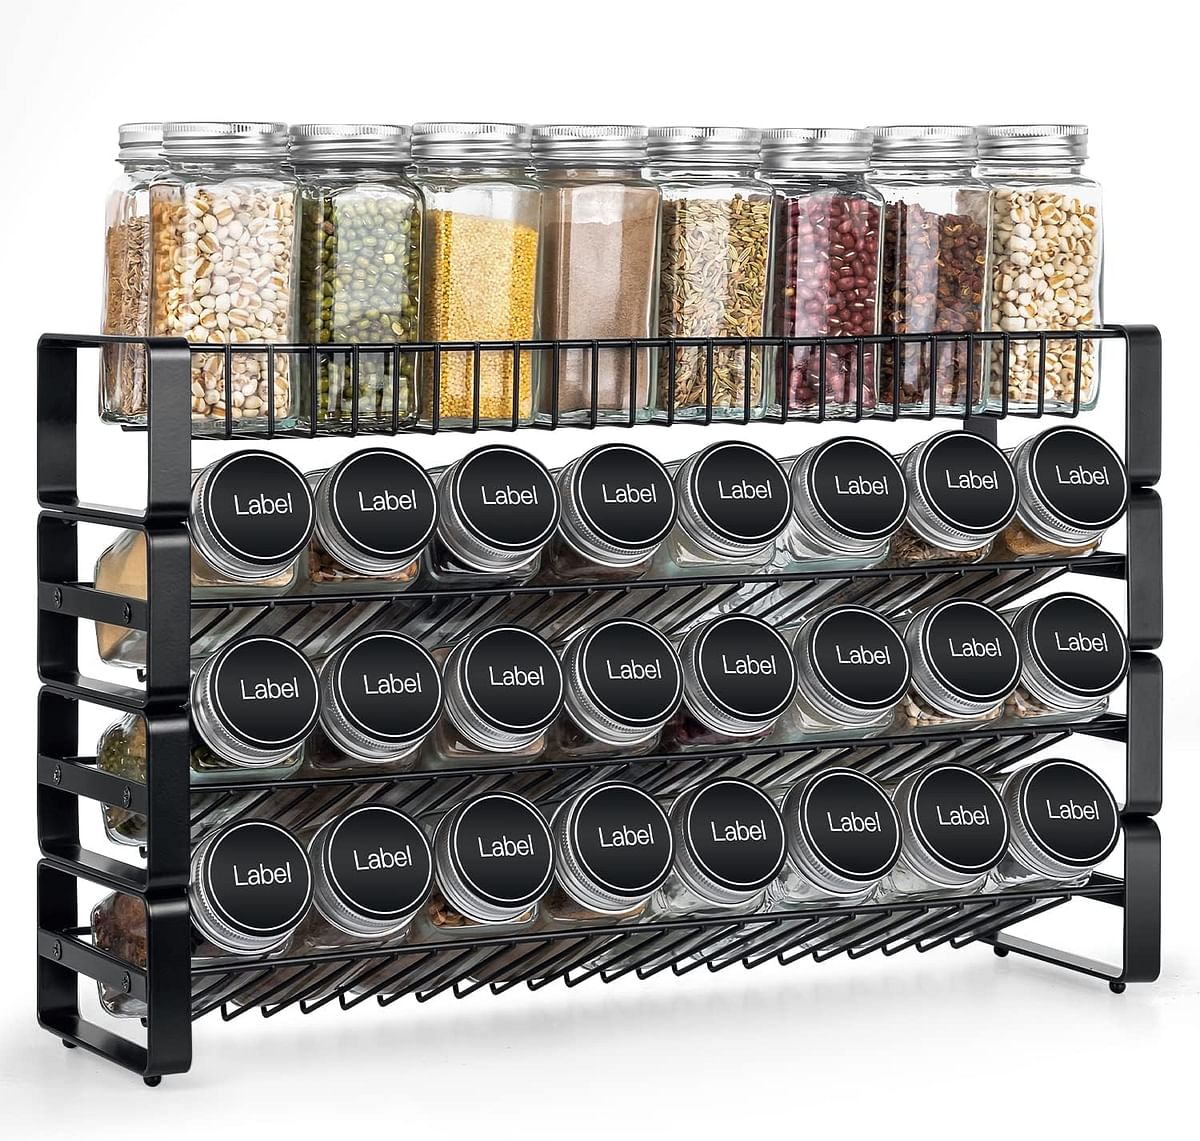 JONYJ 4-Tier Stackable Cabinet Spice Rack Organizer, Detachable Countertop, Freestanding, Black Brushed Iron, Style Complanate